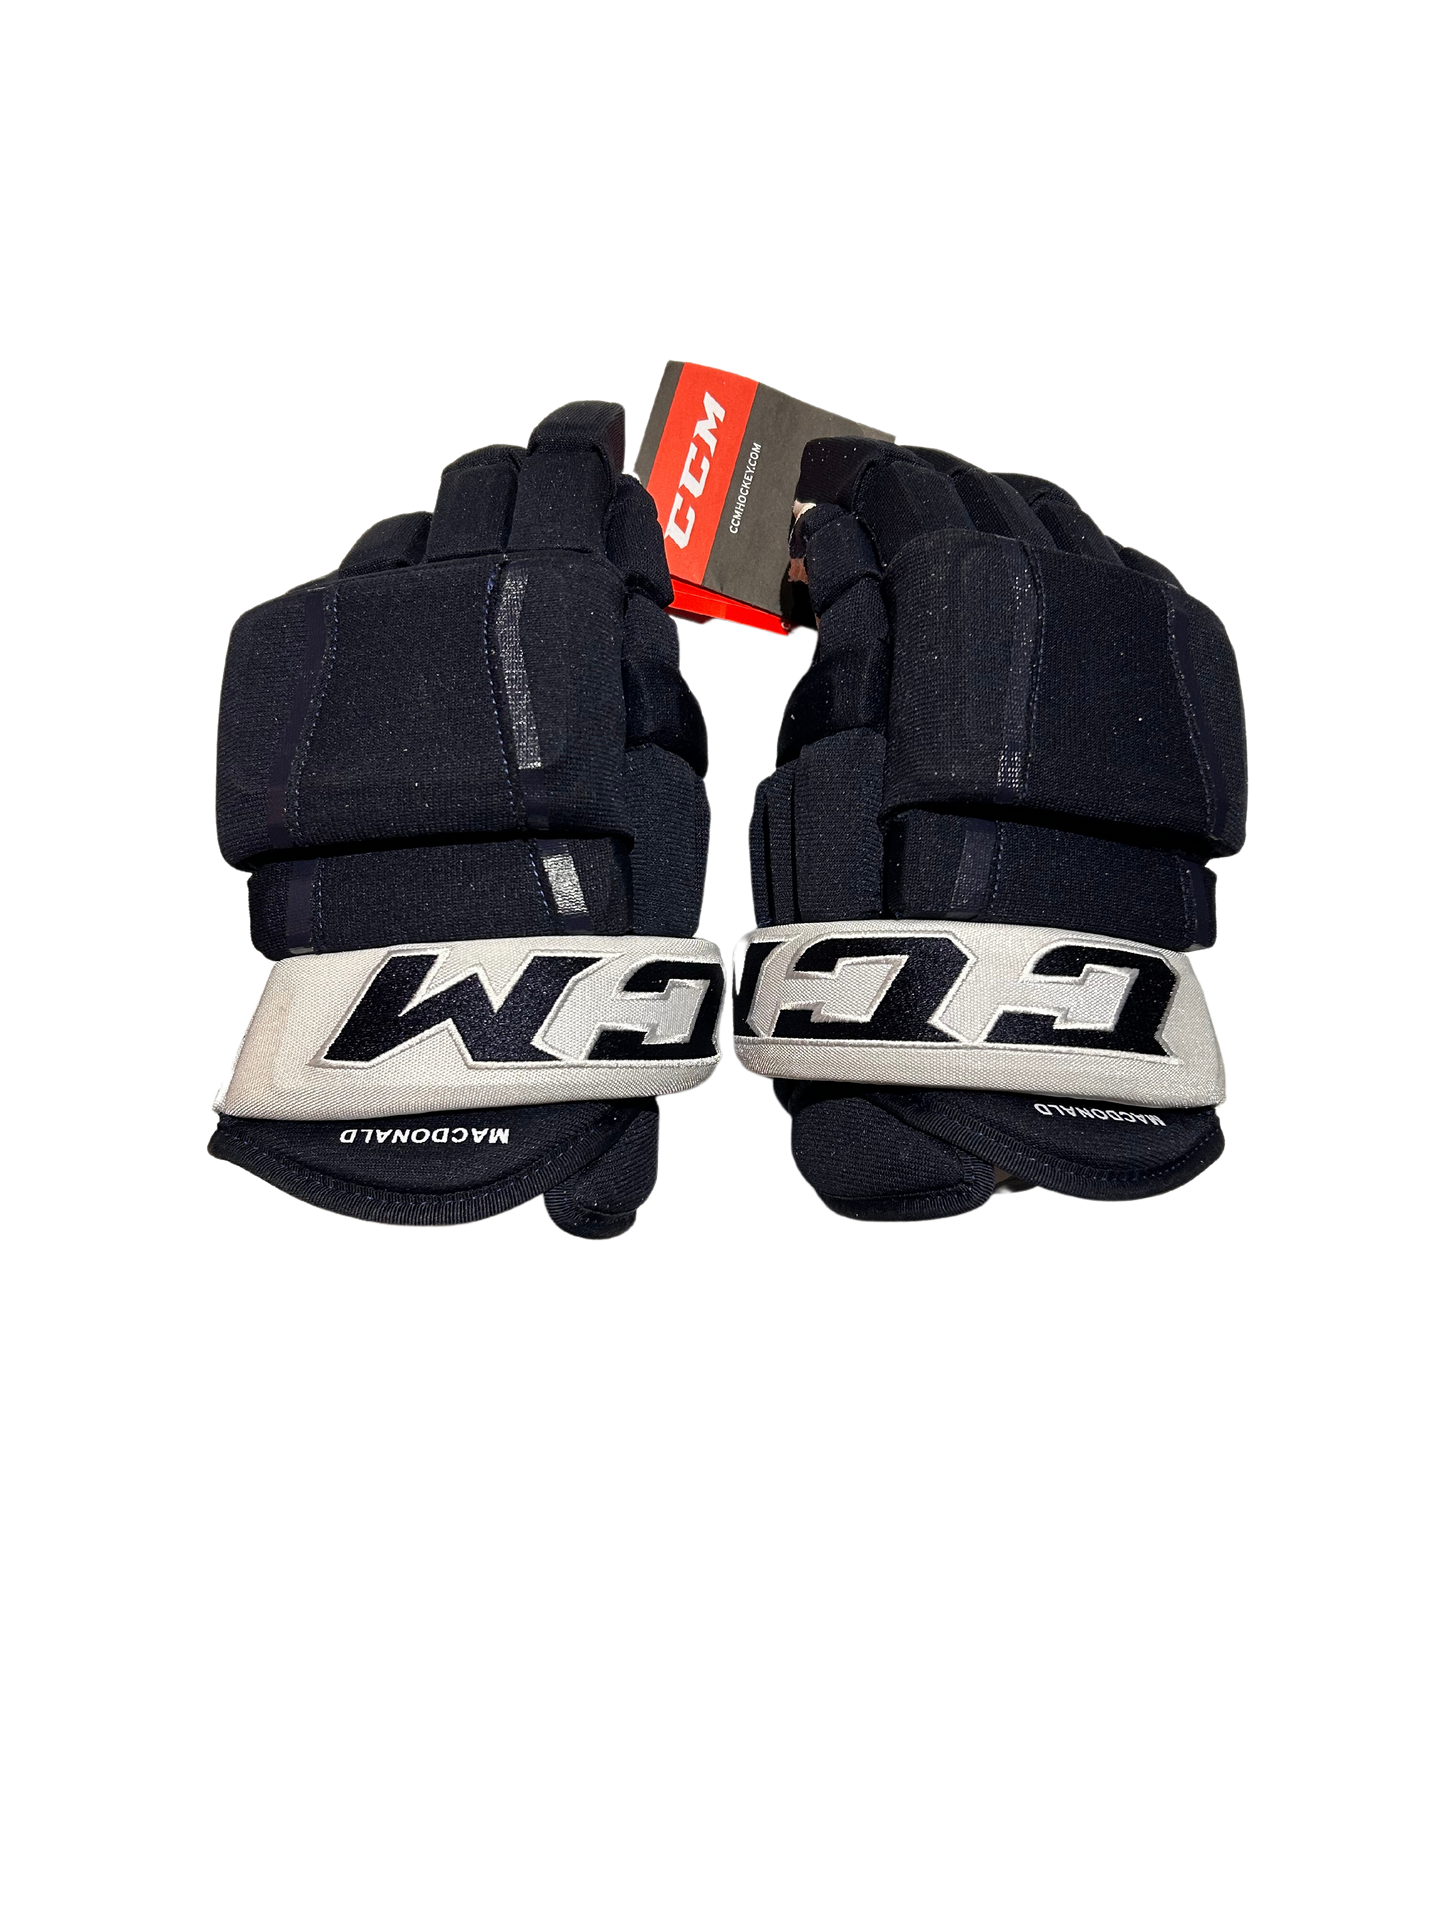 New Player Issued Navy & White Colorado Avalanche CCM HG97 Gloves (Multiple Sizes)